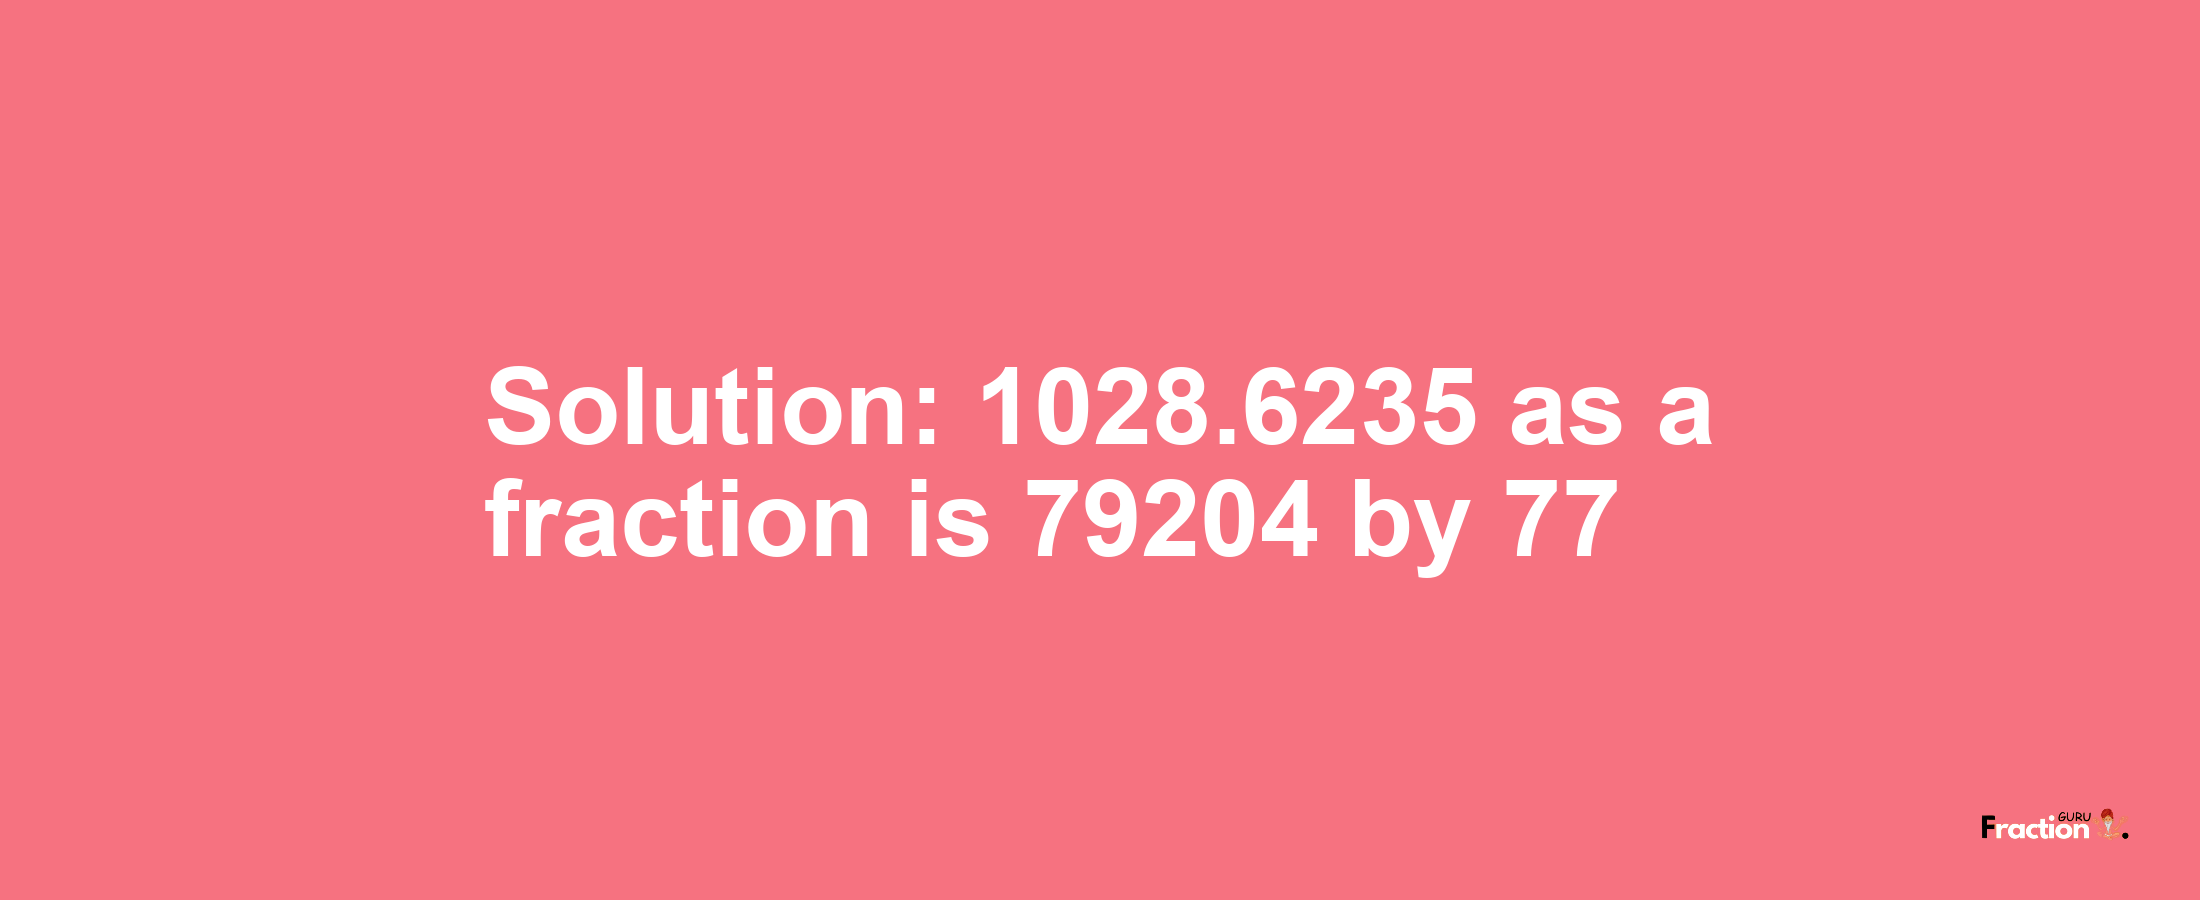 Solution:1028.6235 as a fraction is 79204/77